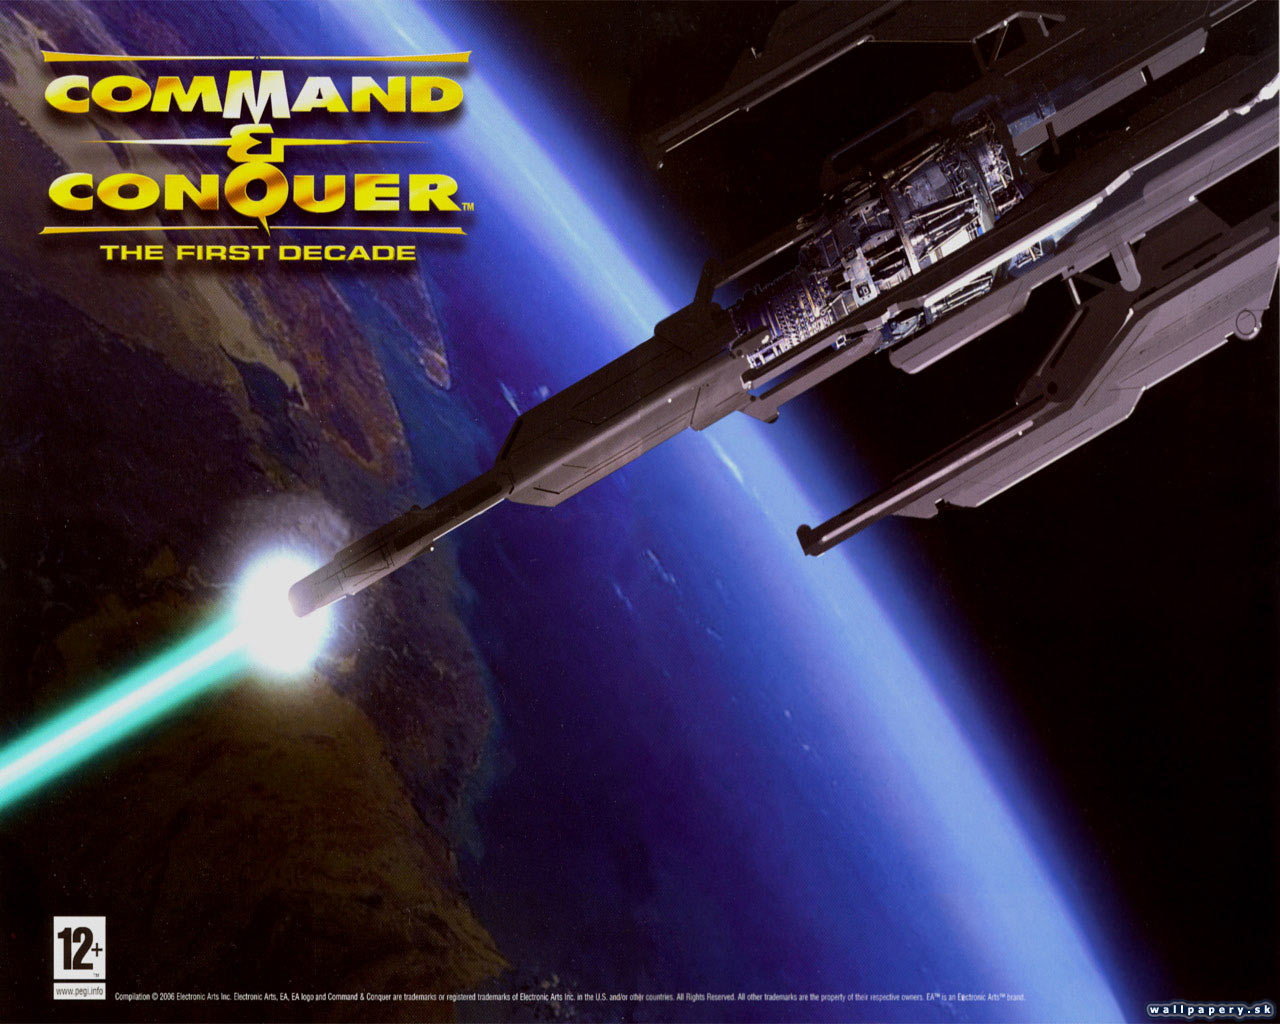 Command & Conquer: The First Decade - wallpaper 1